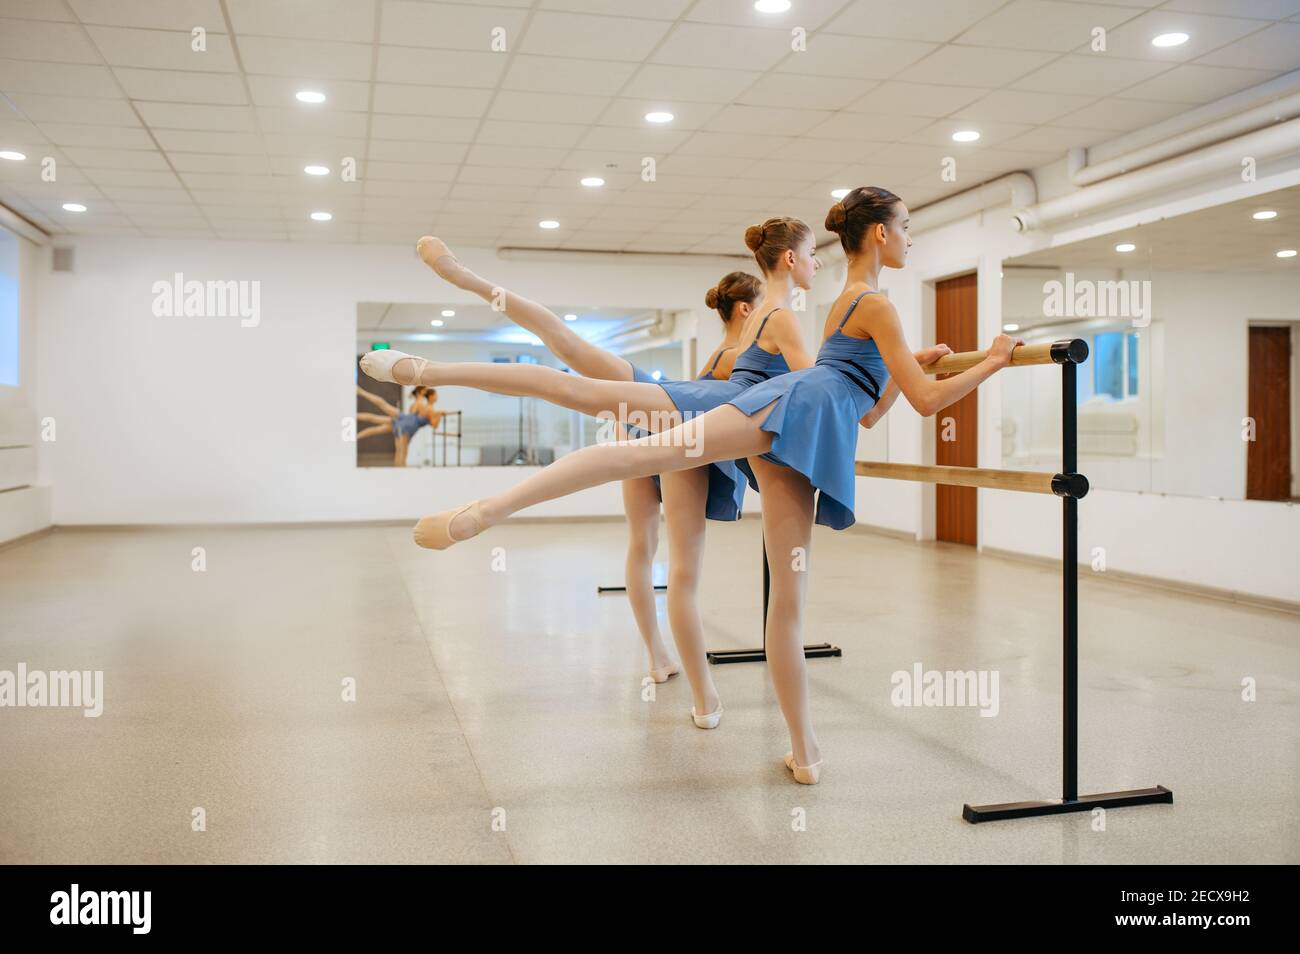 Three young ballerinas rehearsing at the barre Stock Photo